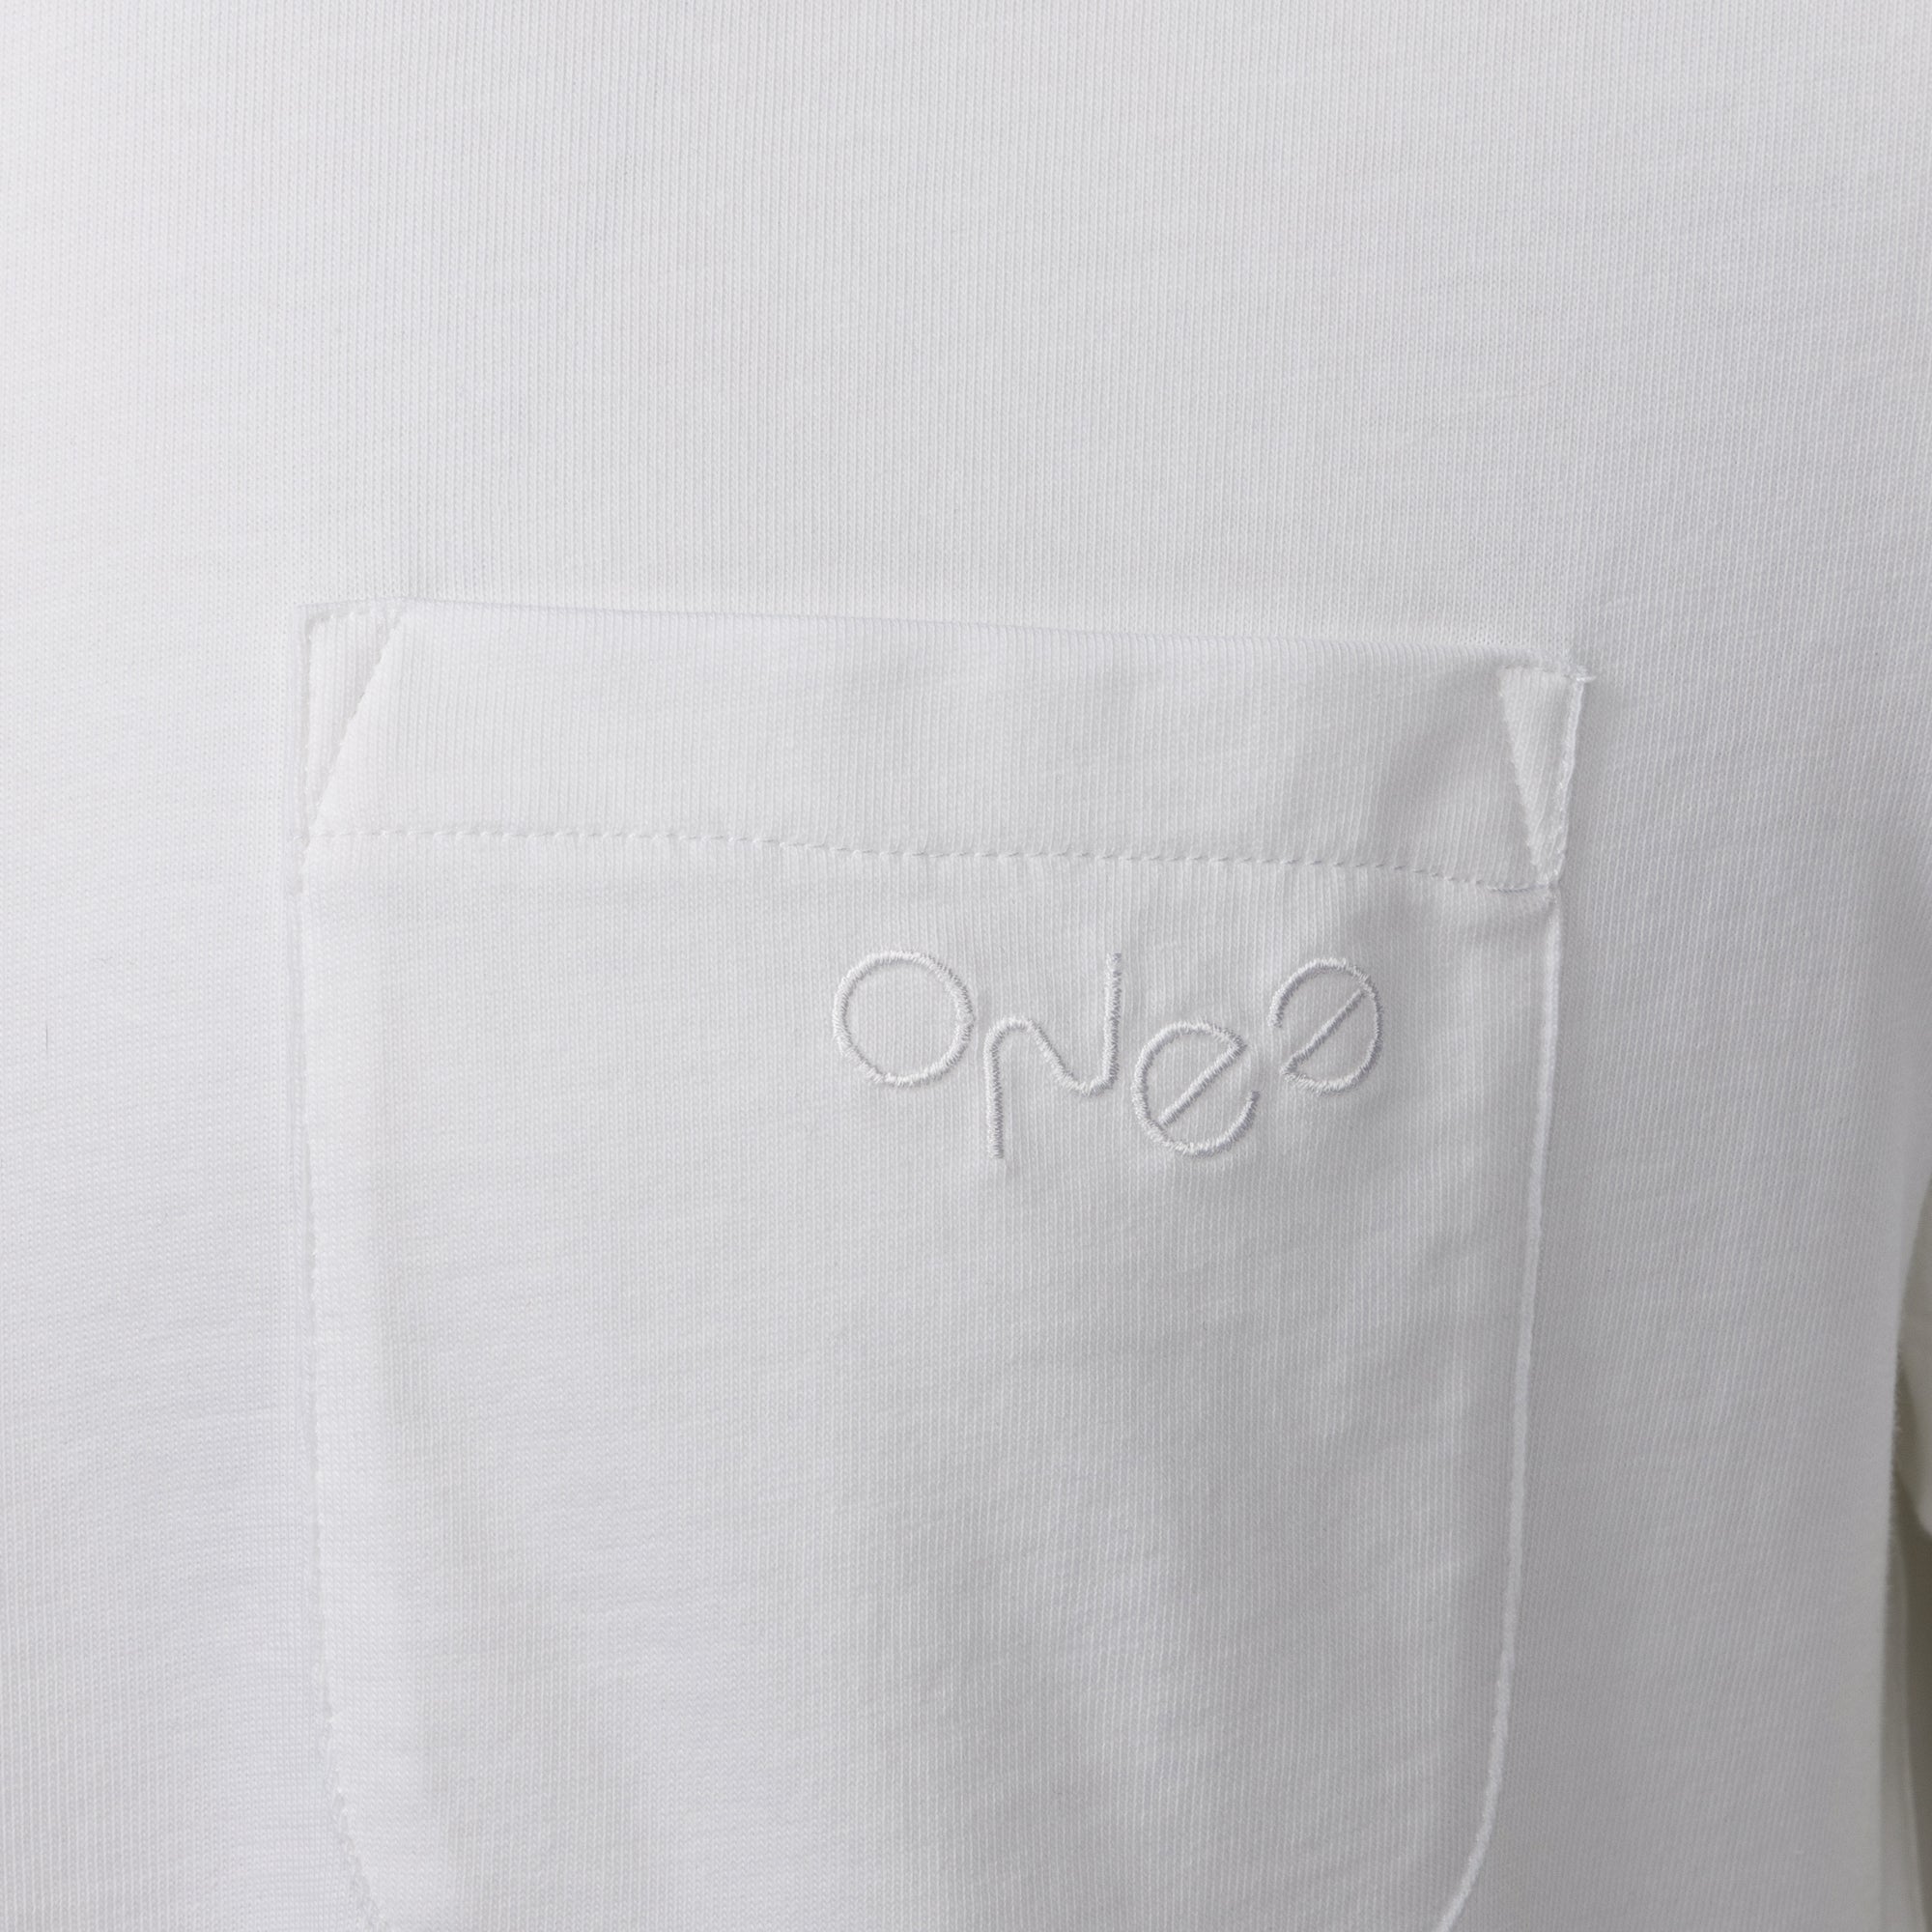 Organic cotton white t shirt detail from ONE Essentials. Organic and recycled cotton pocket t shirt